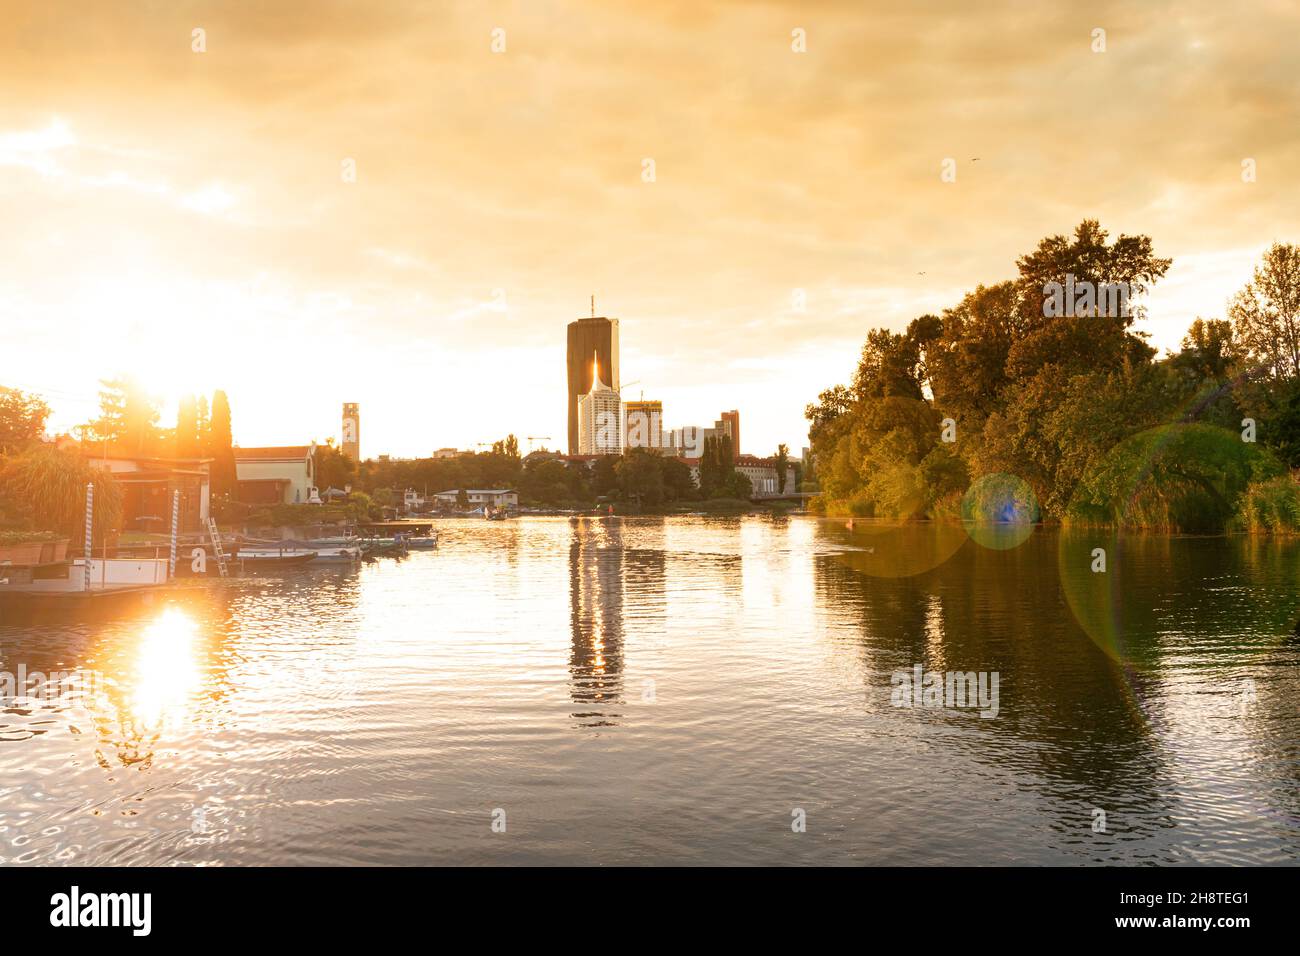 Vienna in summer. Romantic Sunset at the Alten Donau with view to the Skyline. Scenic panorama of the capital city of Austria. Stock Photo